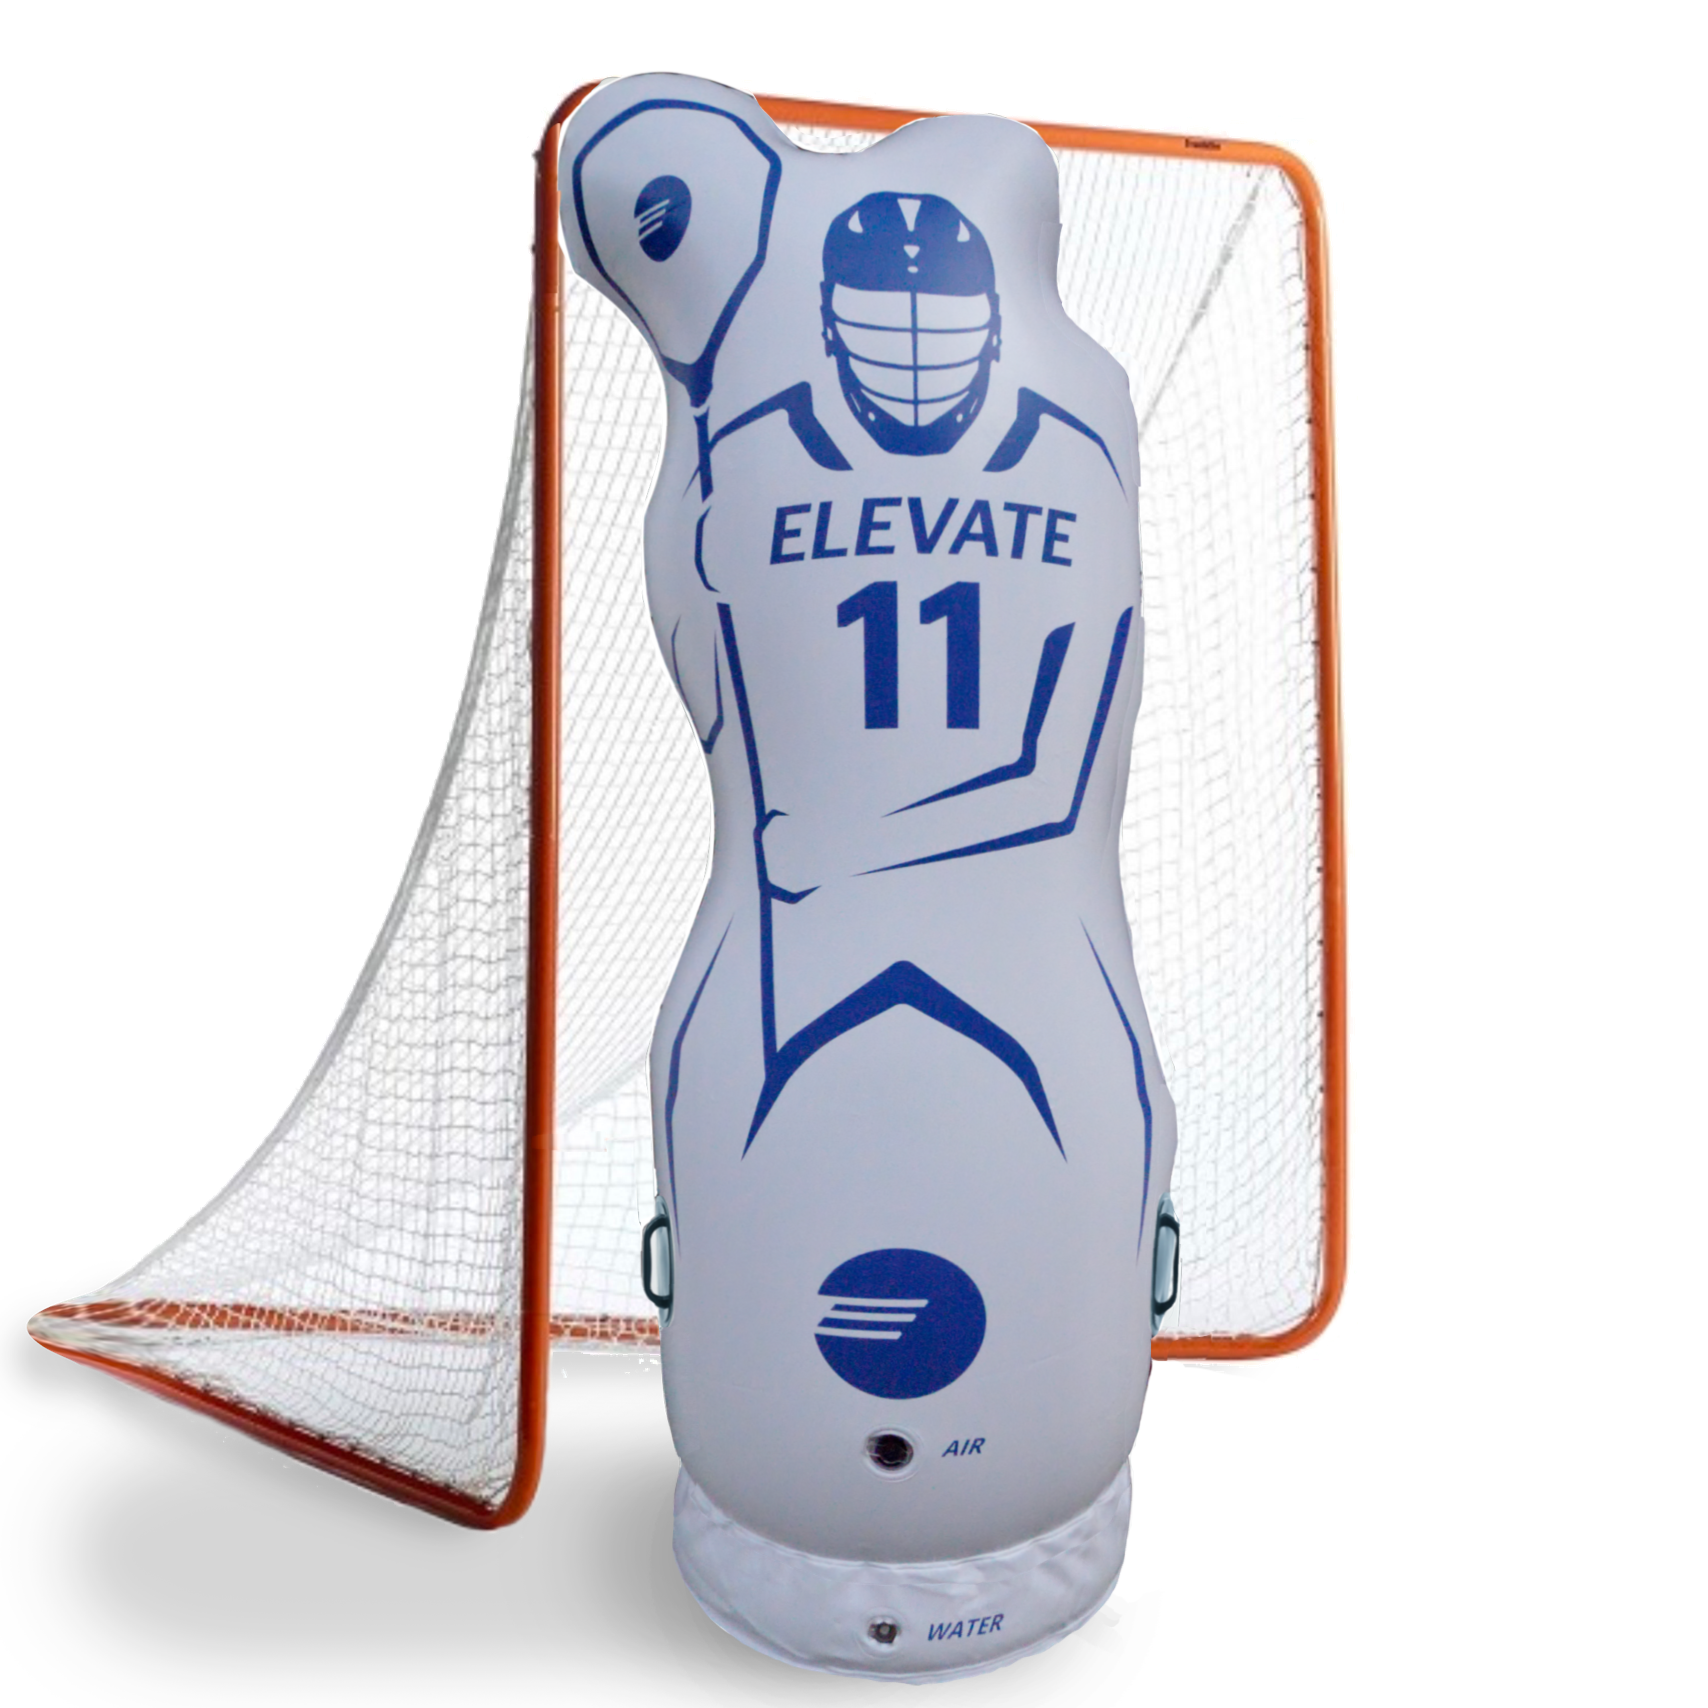 11th man inflatable lacrosse goalie and defender mannequin